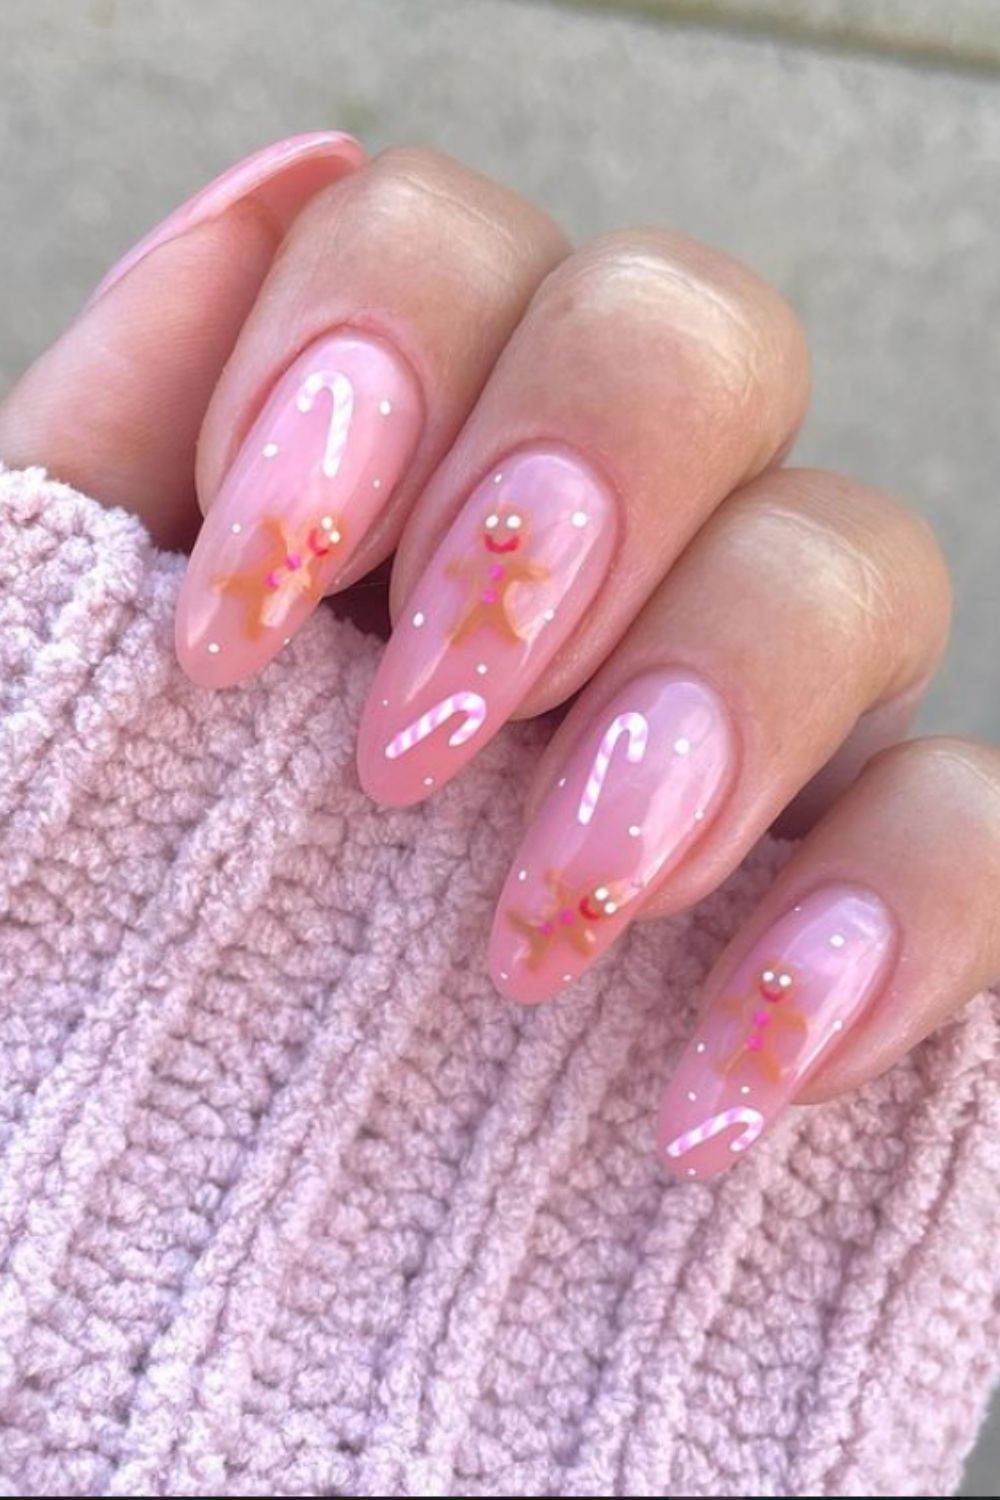 Pink almond nails designs